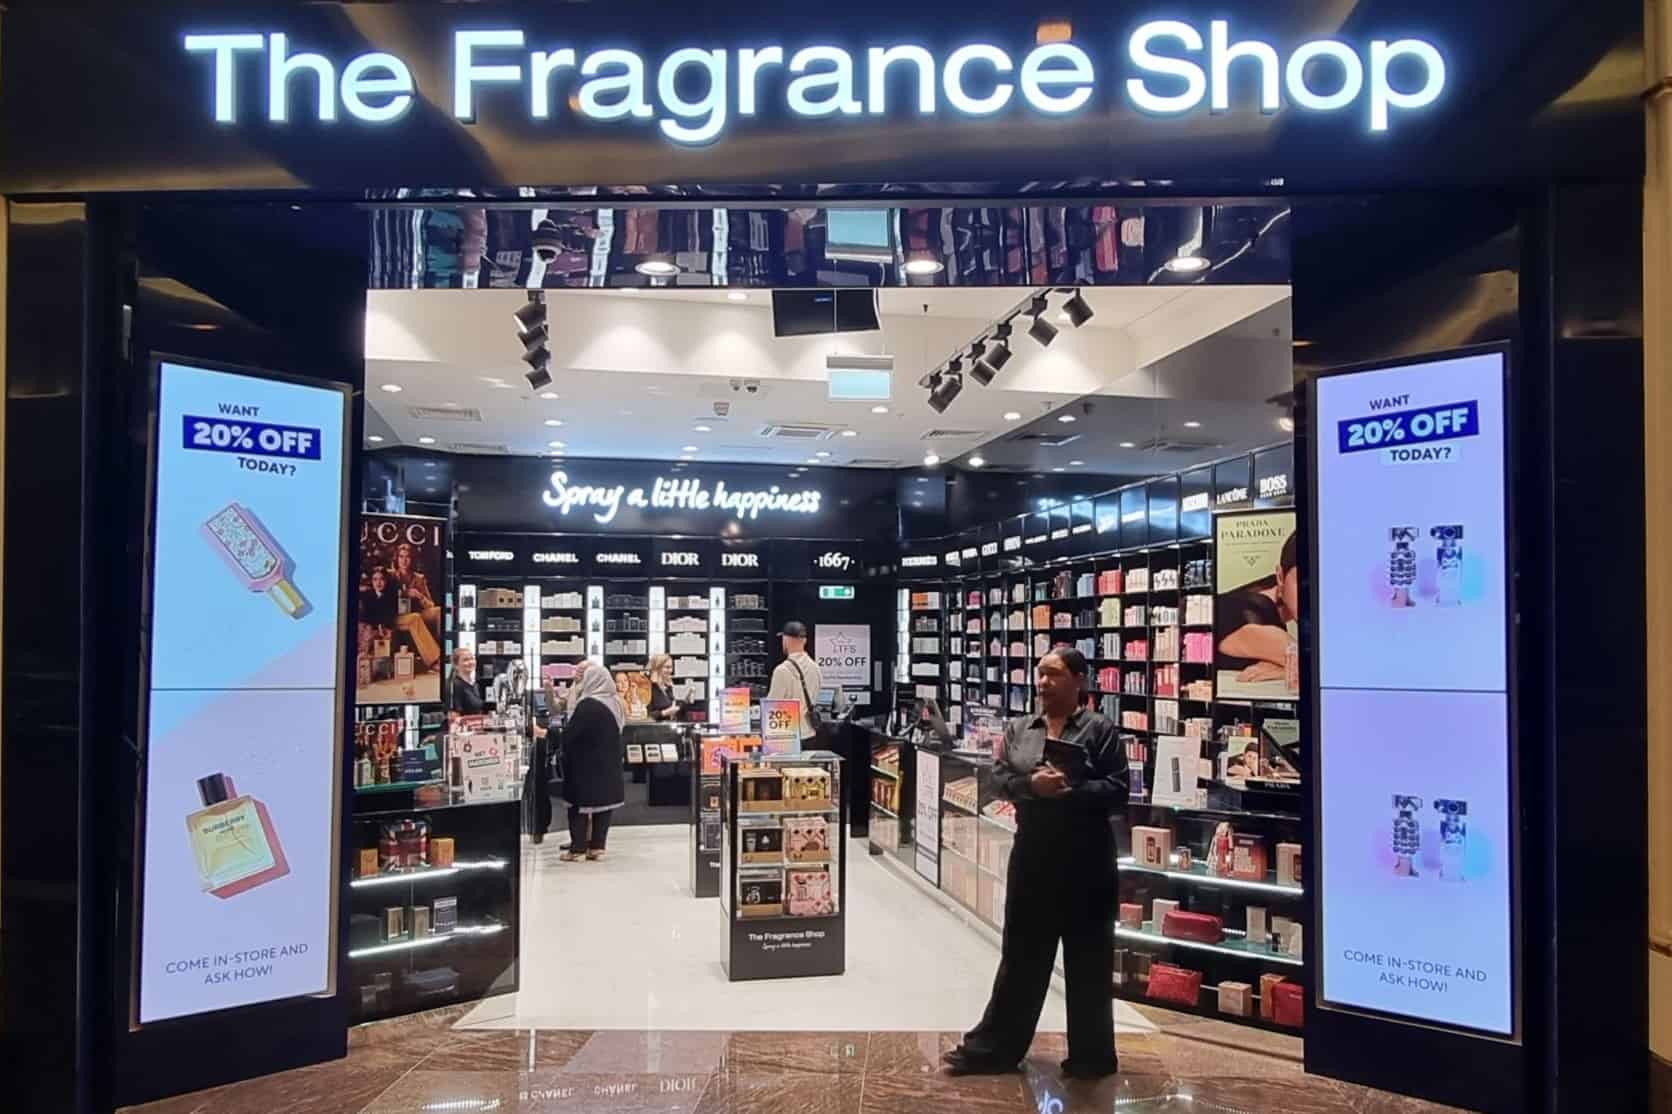 The Fragrance Shop's new Trafford Centre store. Image courtesy of The Fragrance Shop